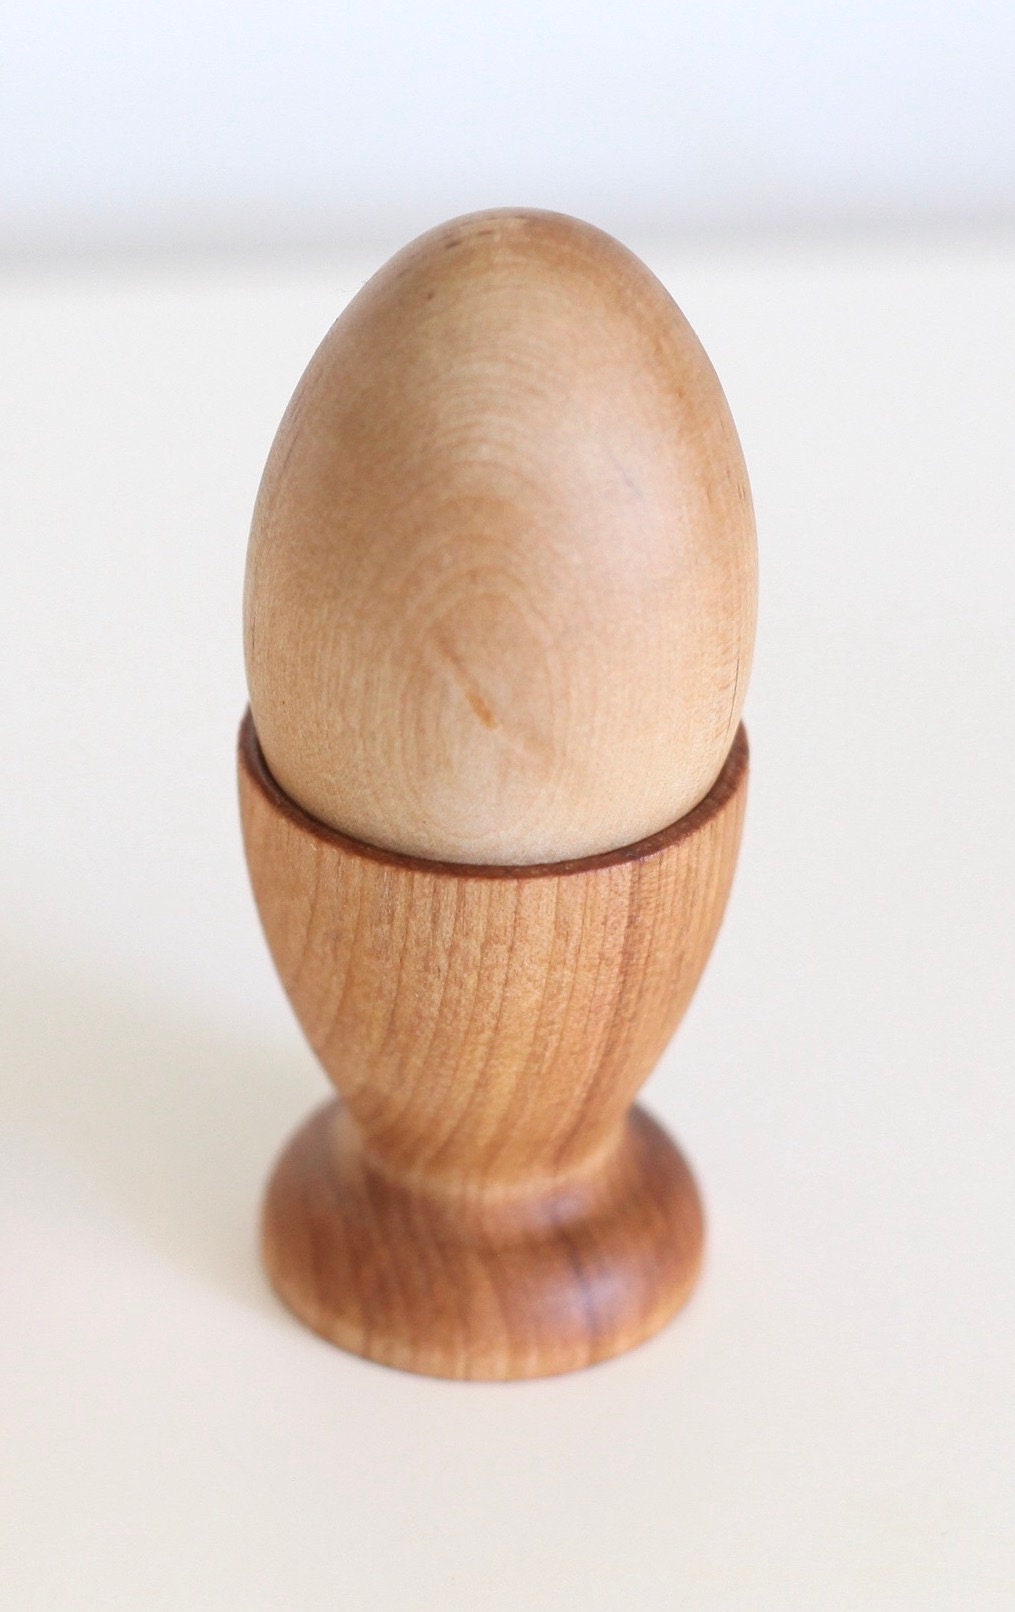 Montessori egg and cup -  France